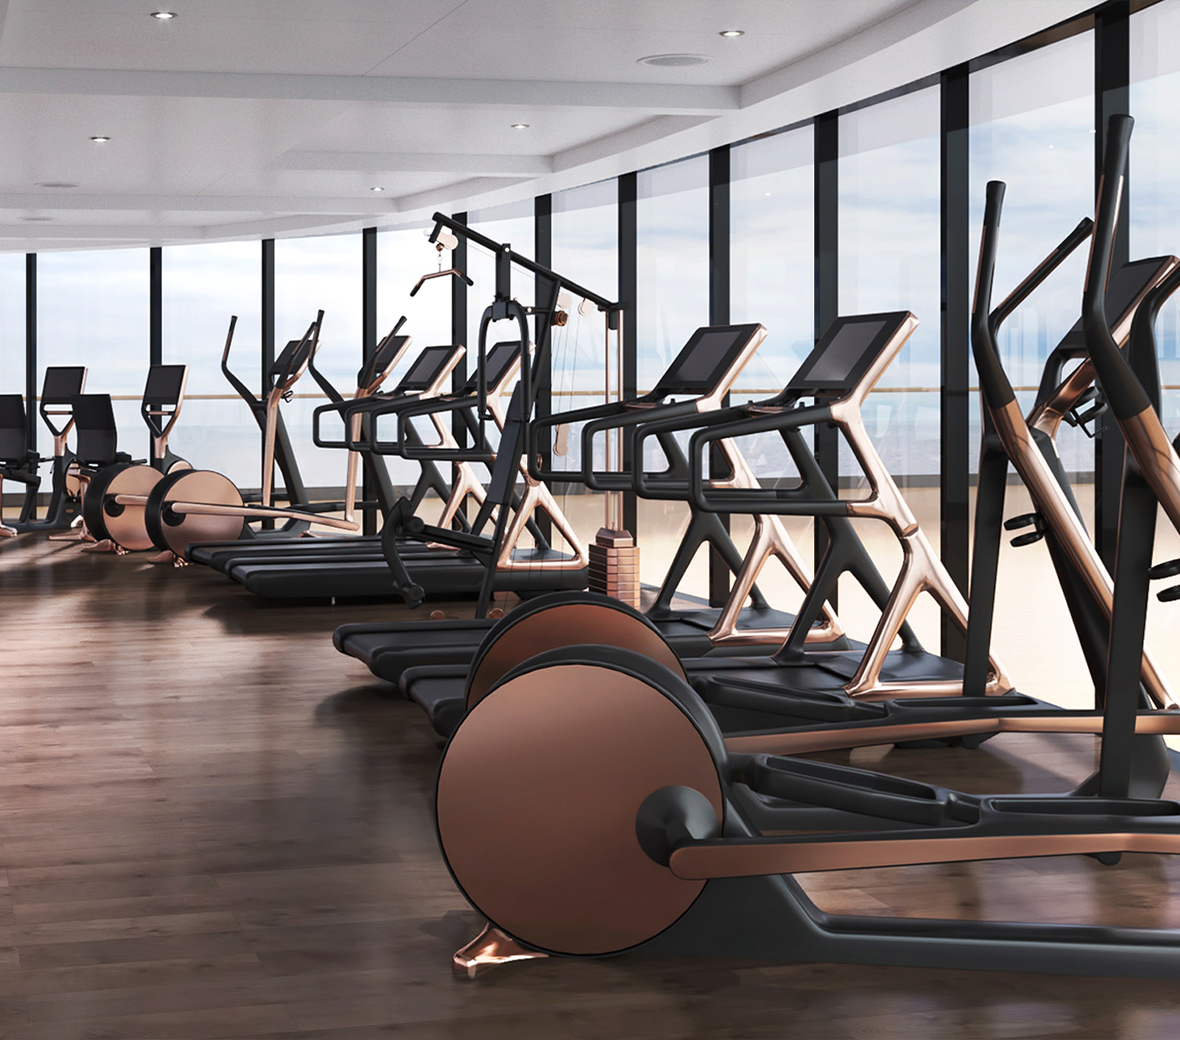 A fitness studio with glass windows, tredmills and ellipticals, that overlooks the ocean.